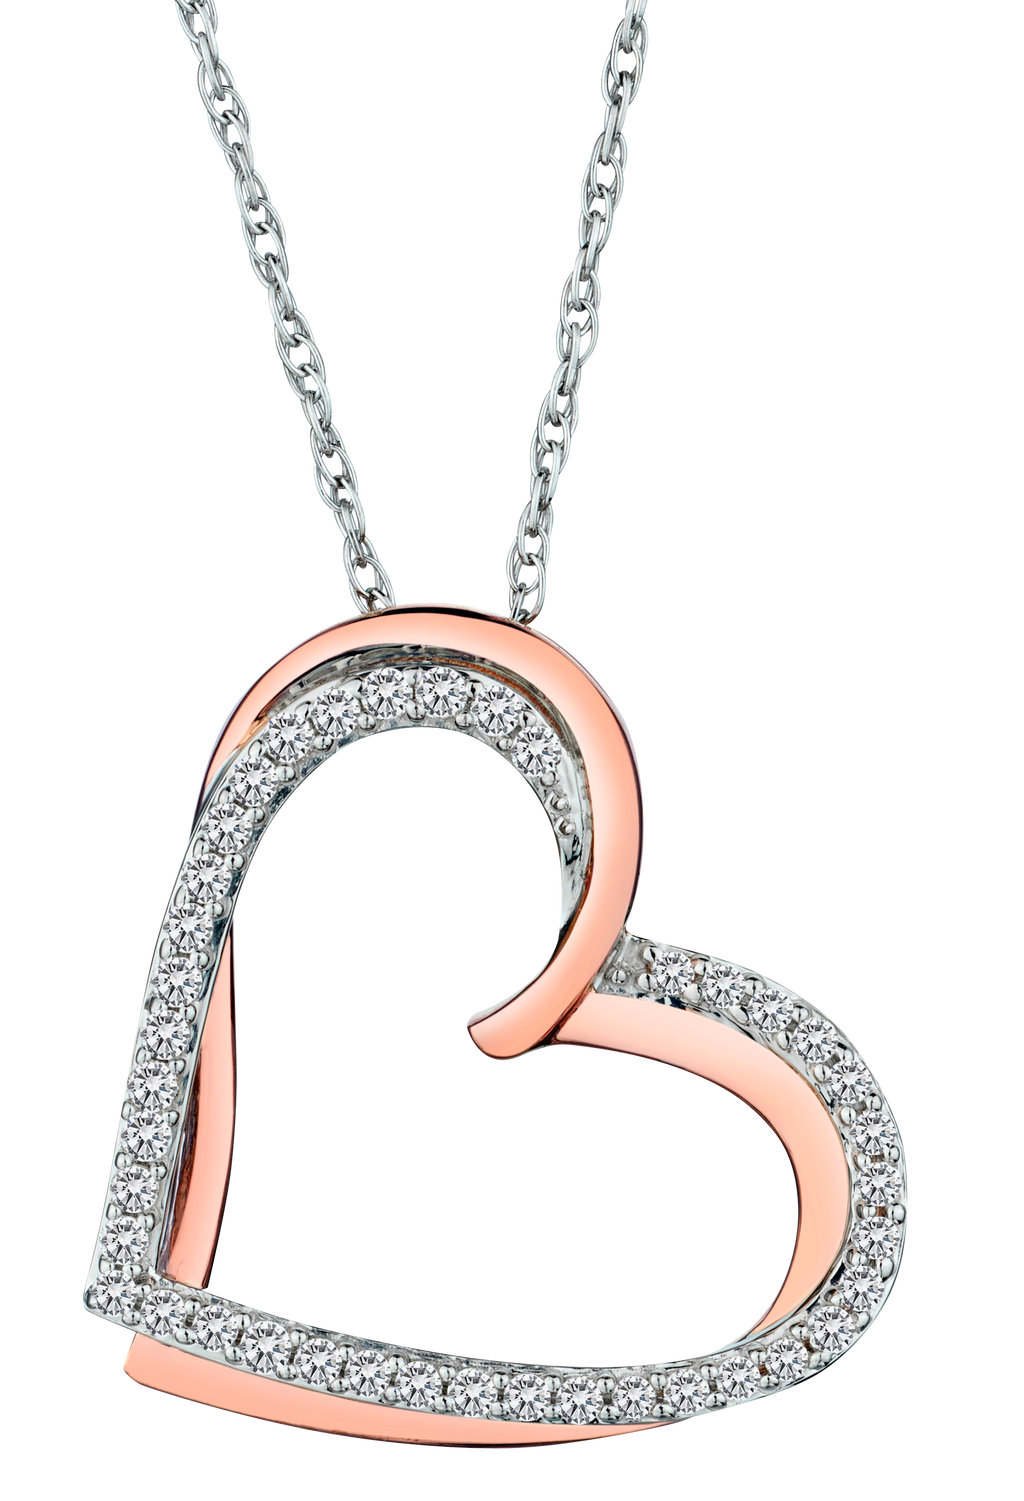 .26 Carat of Lab Grown Diamonds "Entwined" Heart Pendant, Silver.....................NOW